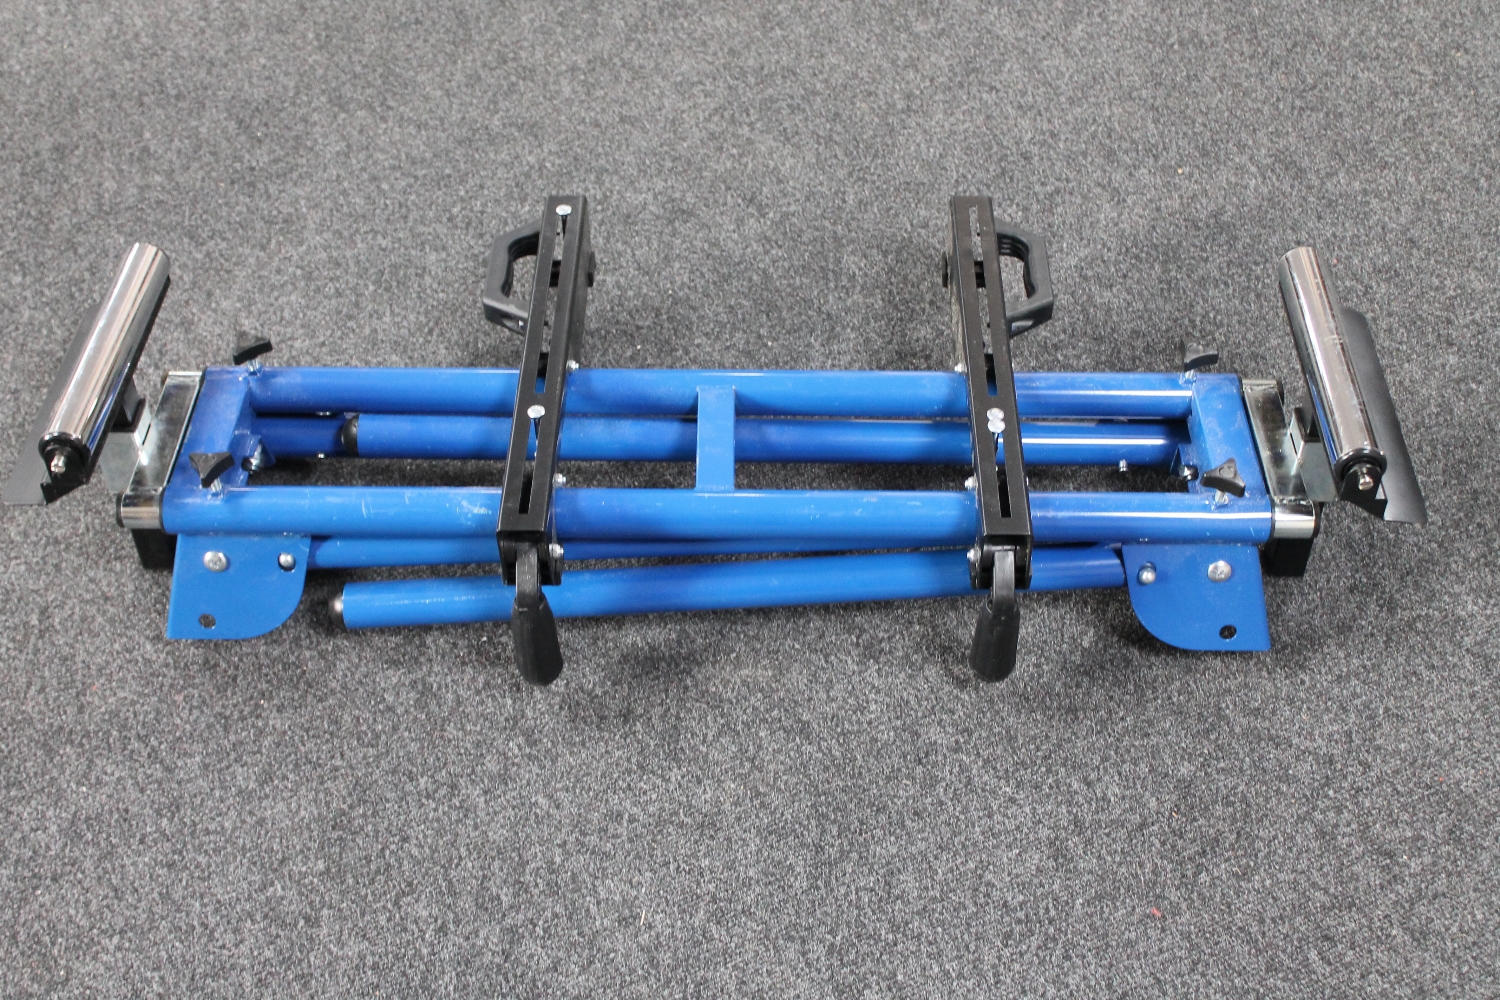 A folding metal roller stand